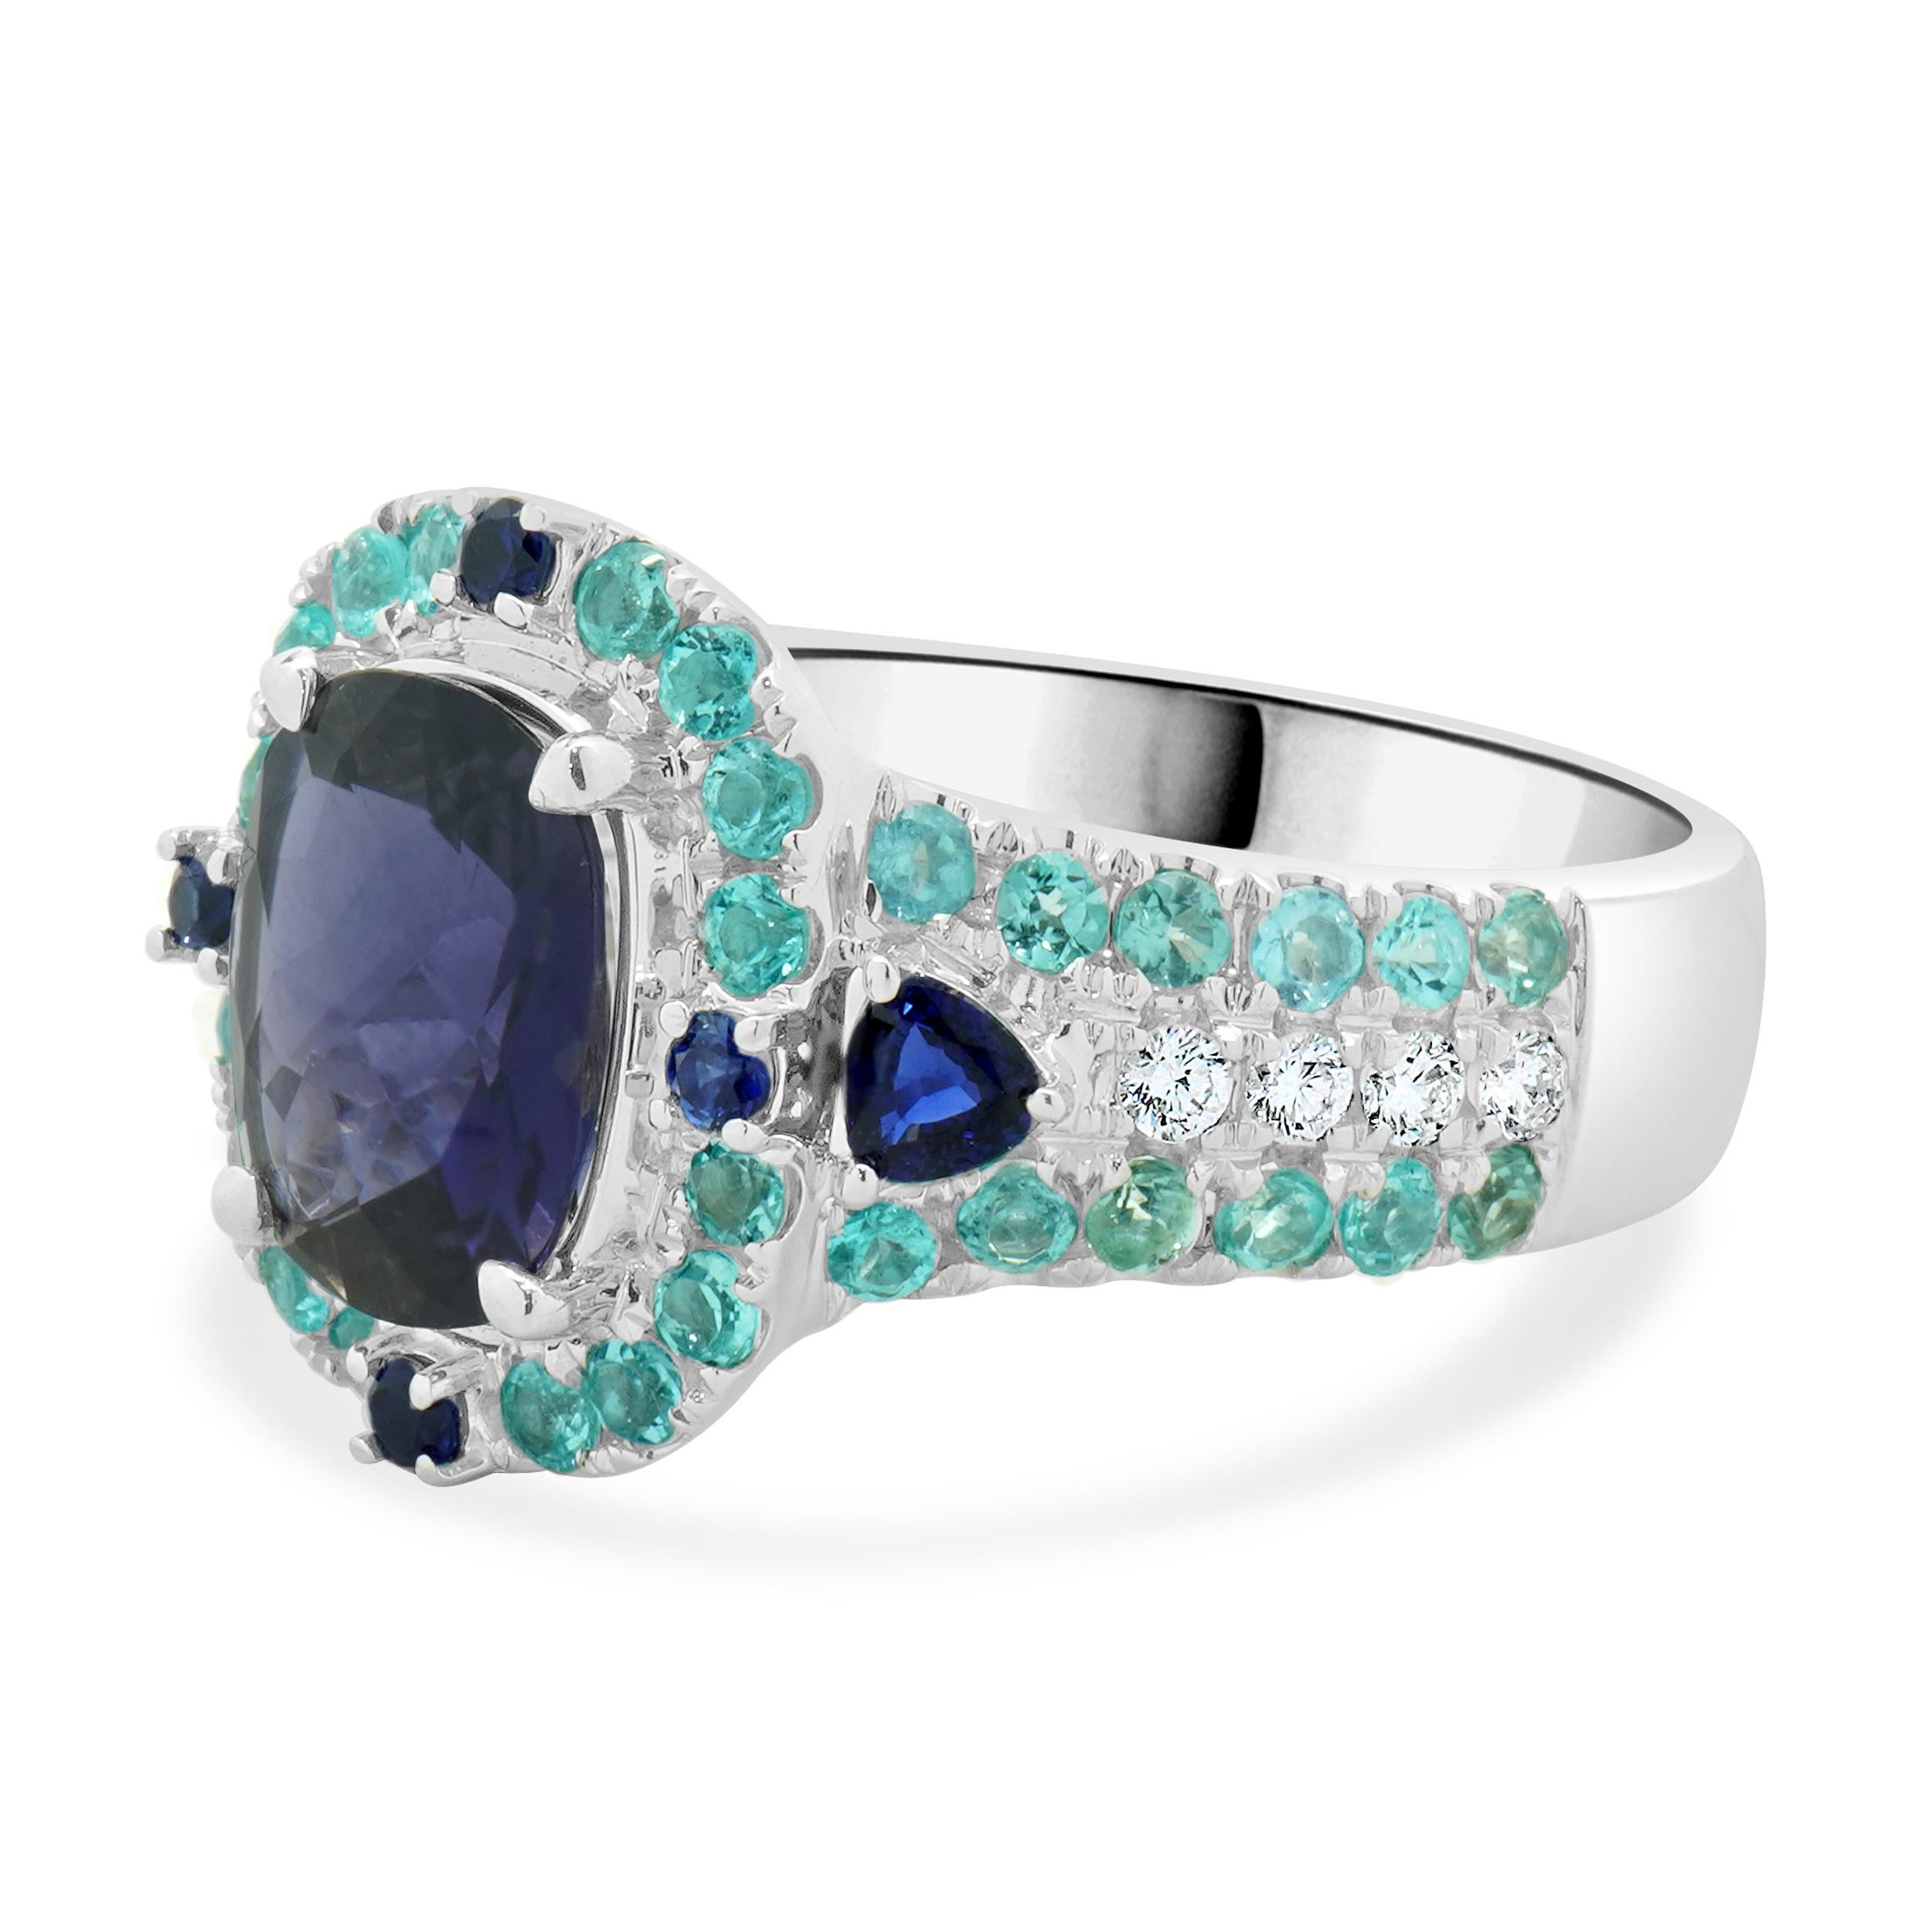 Designer: custom
Material: 18K white gold
Diamond: 8 round brilliant cut = 0.16cttw
Color: G
Clarity: SI1
Iolite: 1 cushion cut = 1.92ct
Paraiba Tourmaline: round cut = 1.15cttw
Ring Size: 7.5 (please allow two extra shipping days for sizing